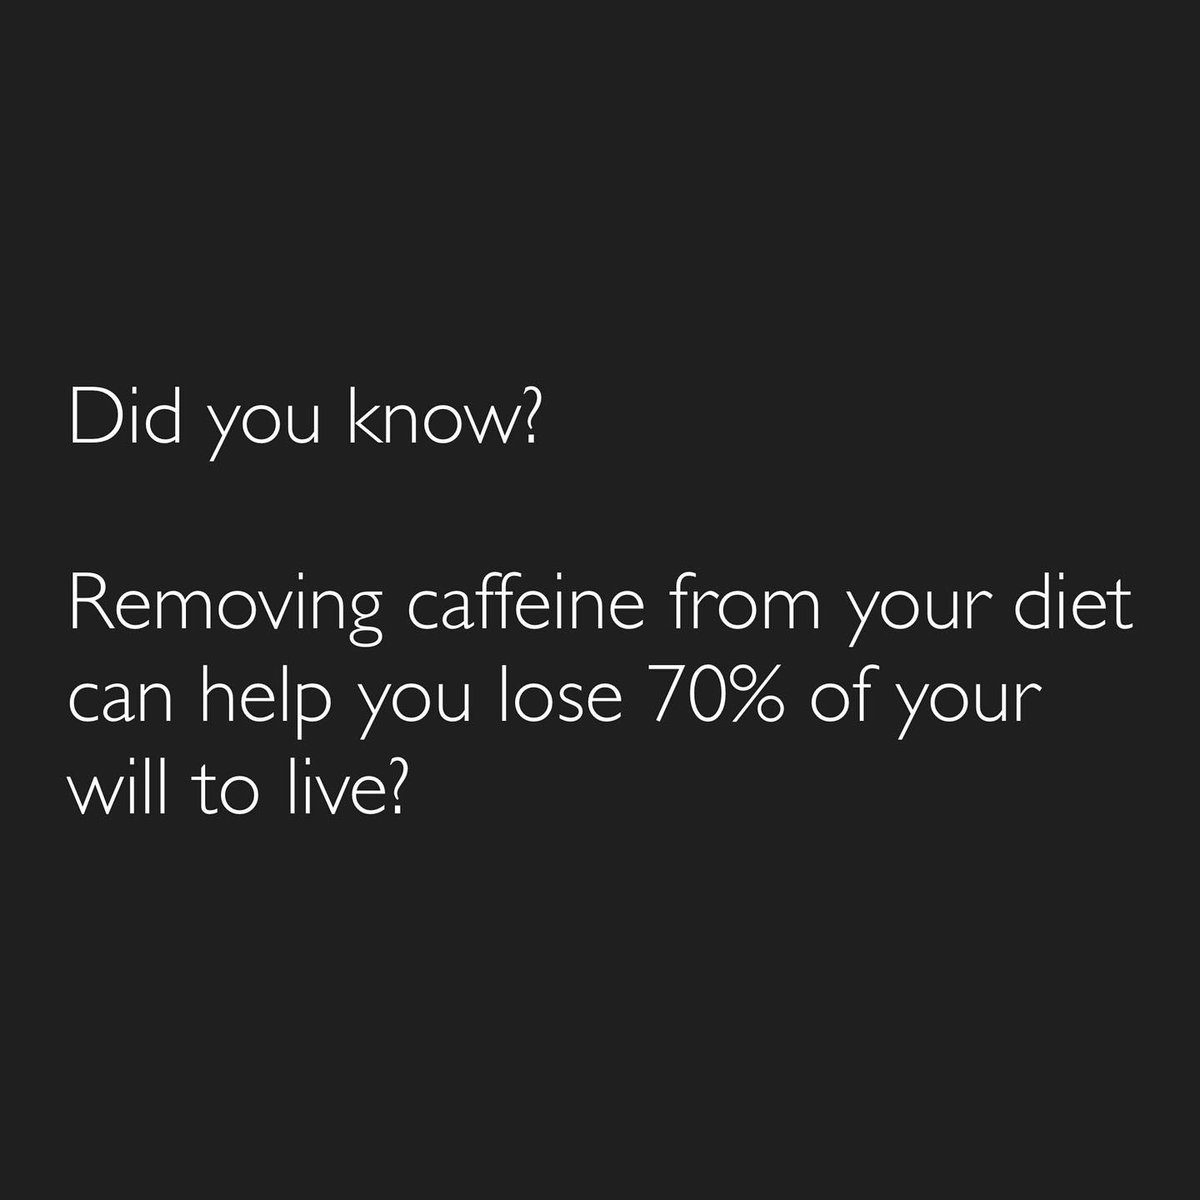 #dieting @coffeeprops

#mondaymotivation #coffeelover #cafexperiment #coffeequote #teamcoffee #coffegram #caffe #coffee #kaffe #cafe